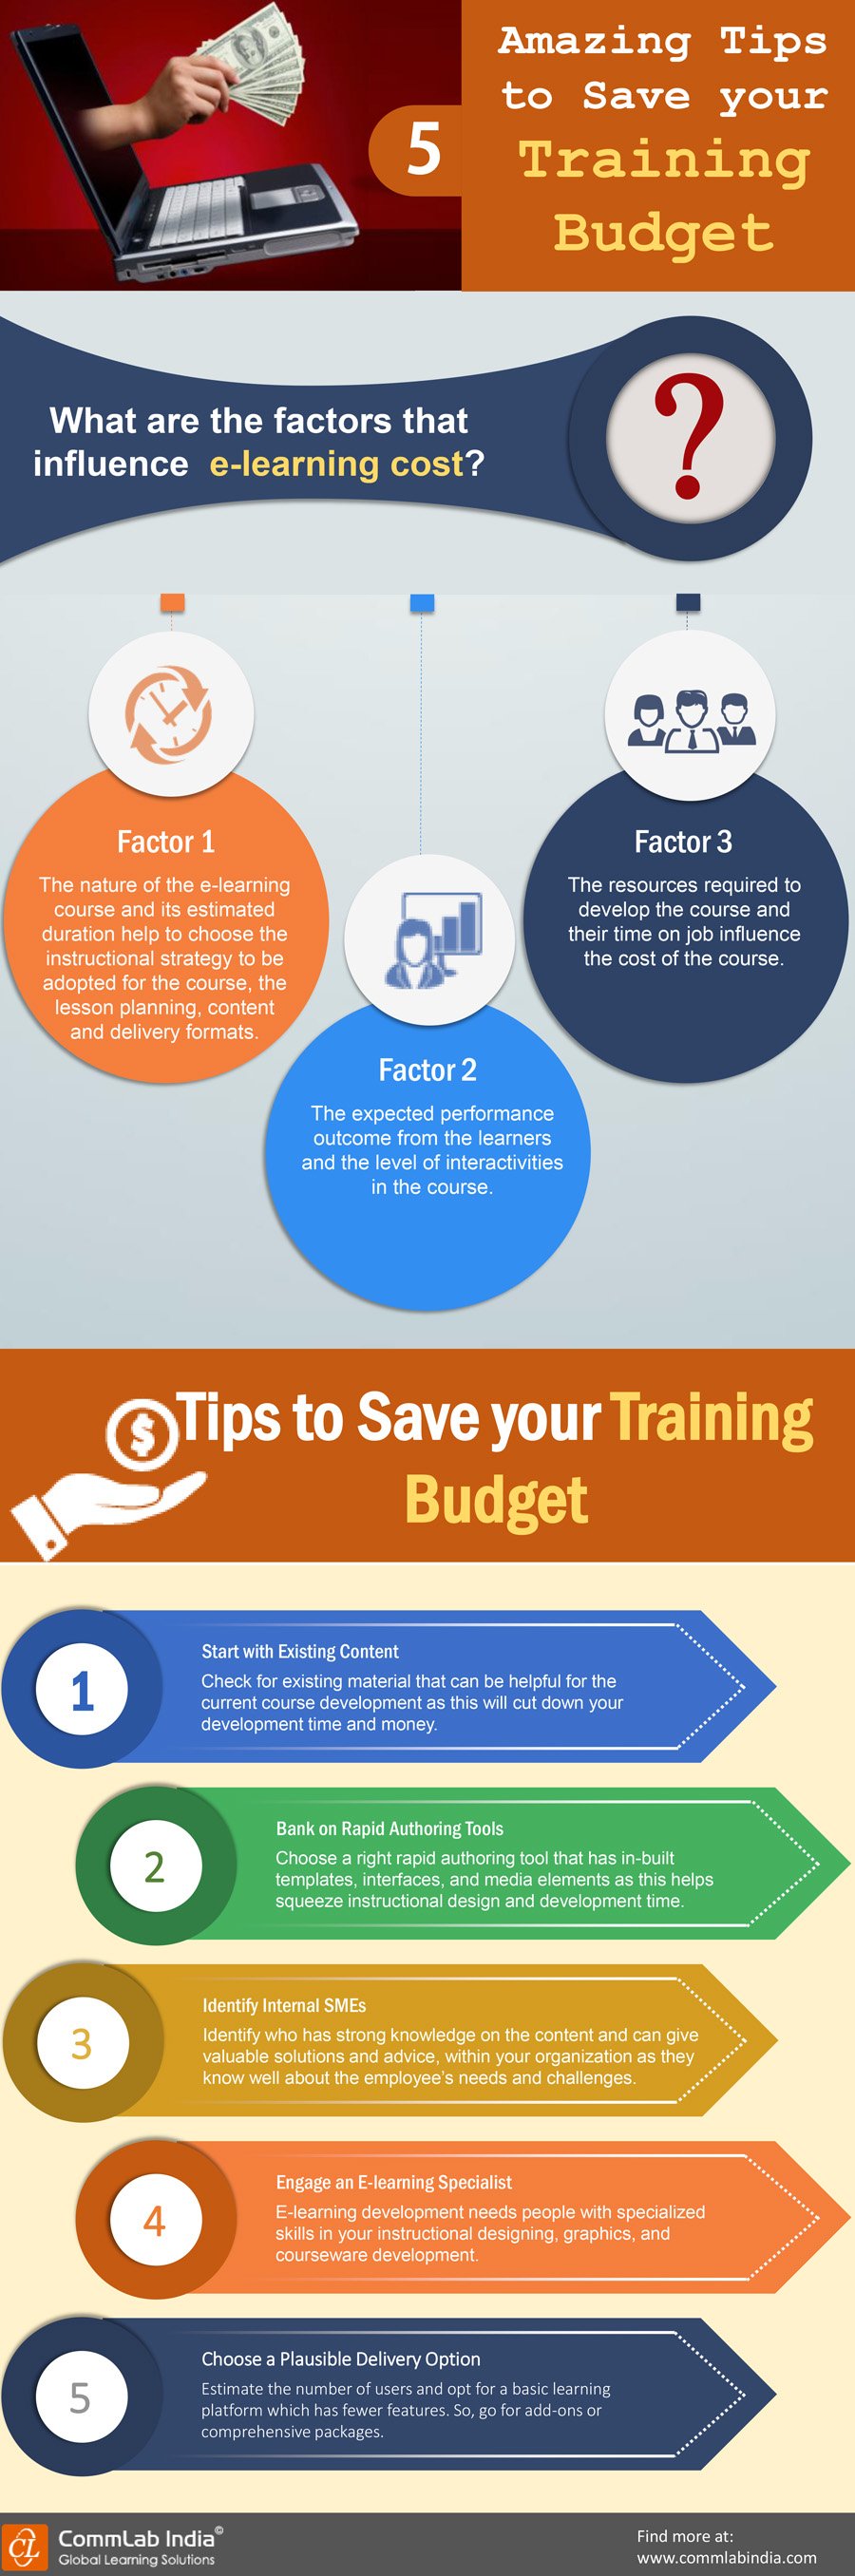 5 Amazing Tips to Save Your Training Budget [Infographic]